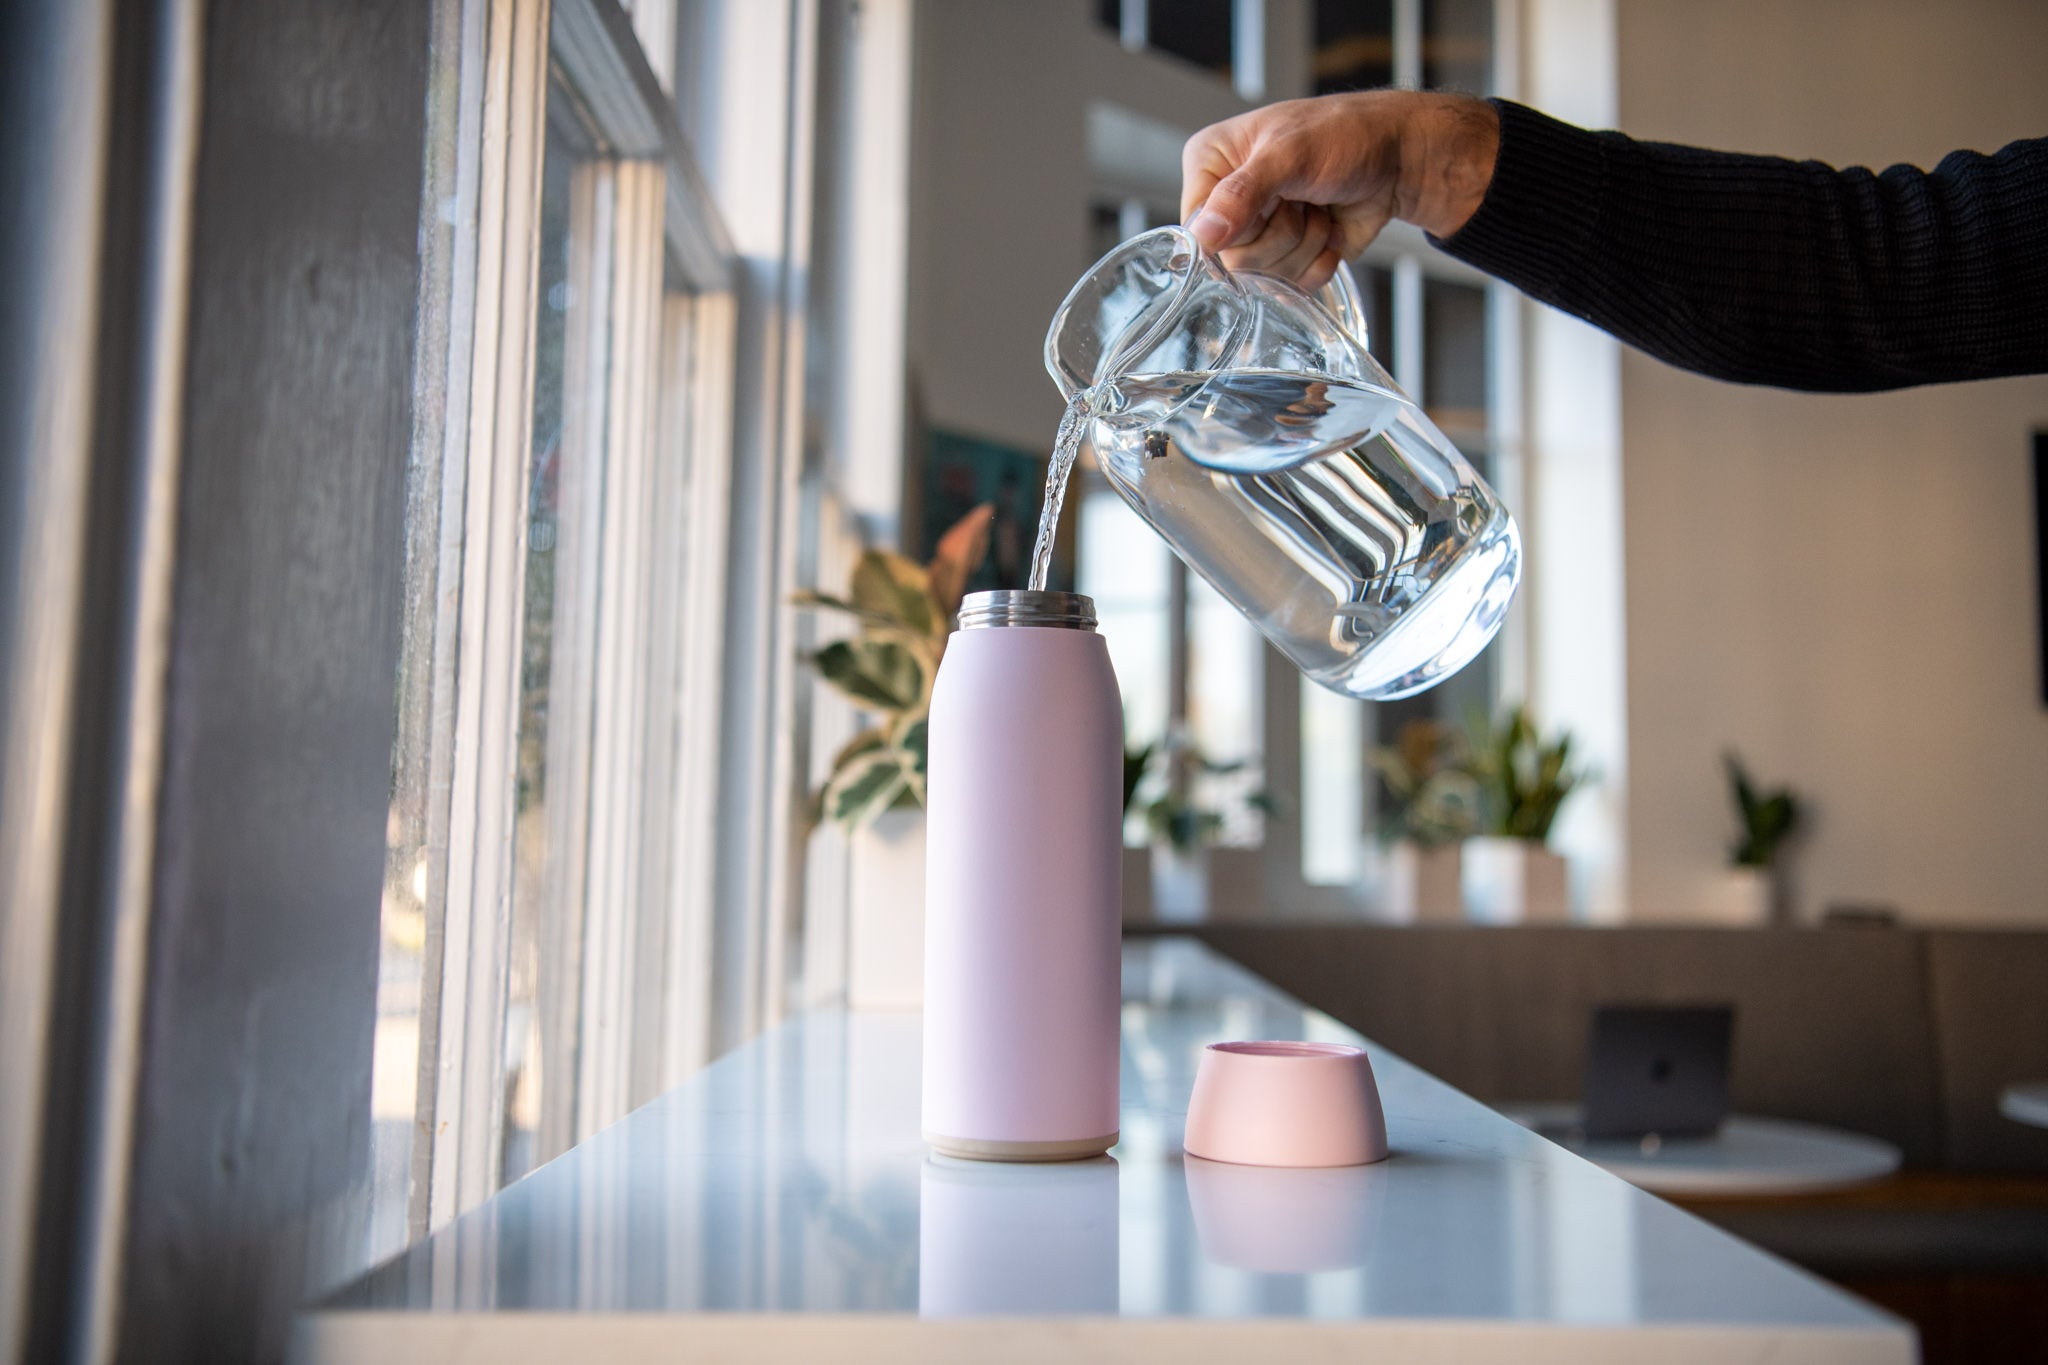 Hitch Bottle & Cup 2 In 1 Combo: Where Drinks Collide For The Better 